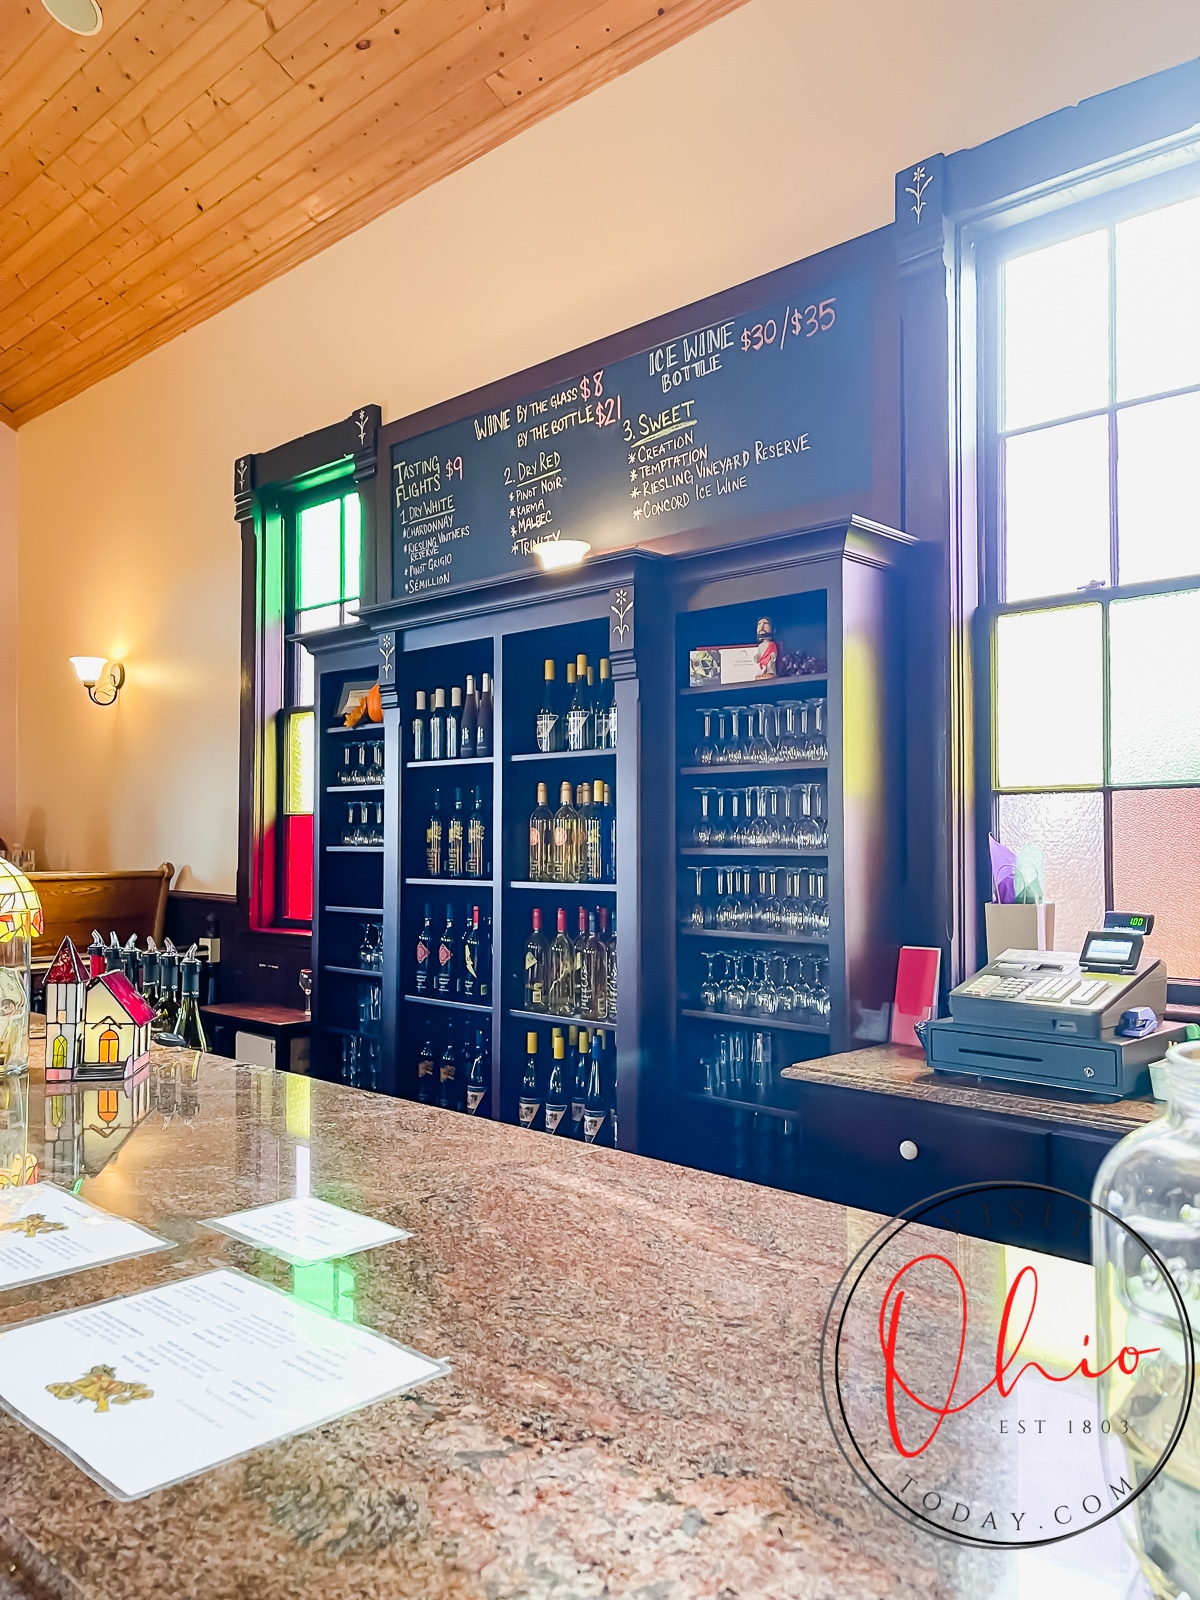 Vertical photo of a wine display with a chalkboard above it, and a bar in the foreground, at South River Winery. Photo credit: Cindy Gordon of VisitOhioToday.com